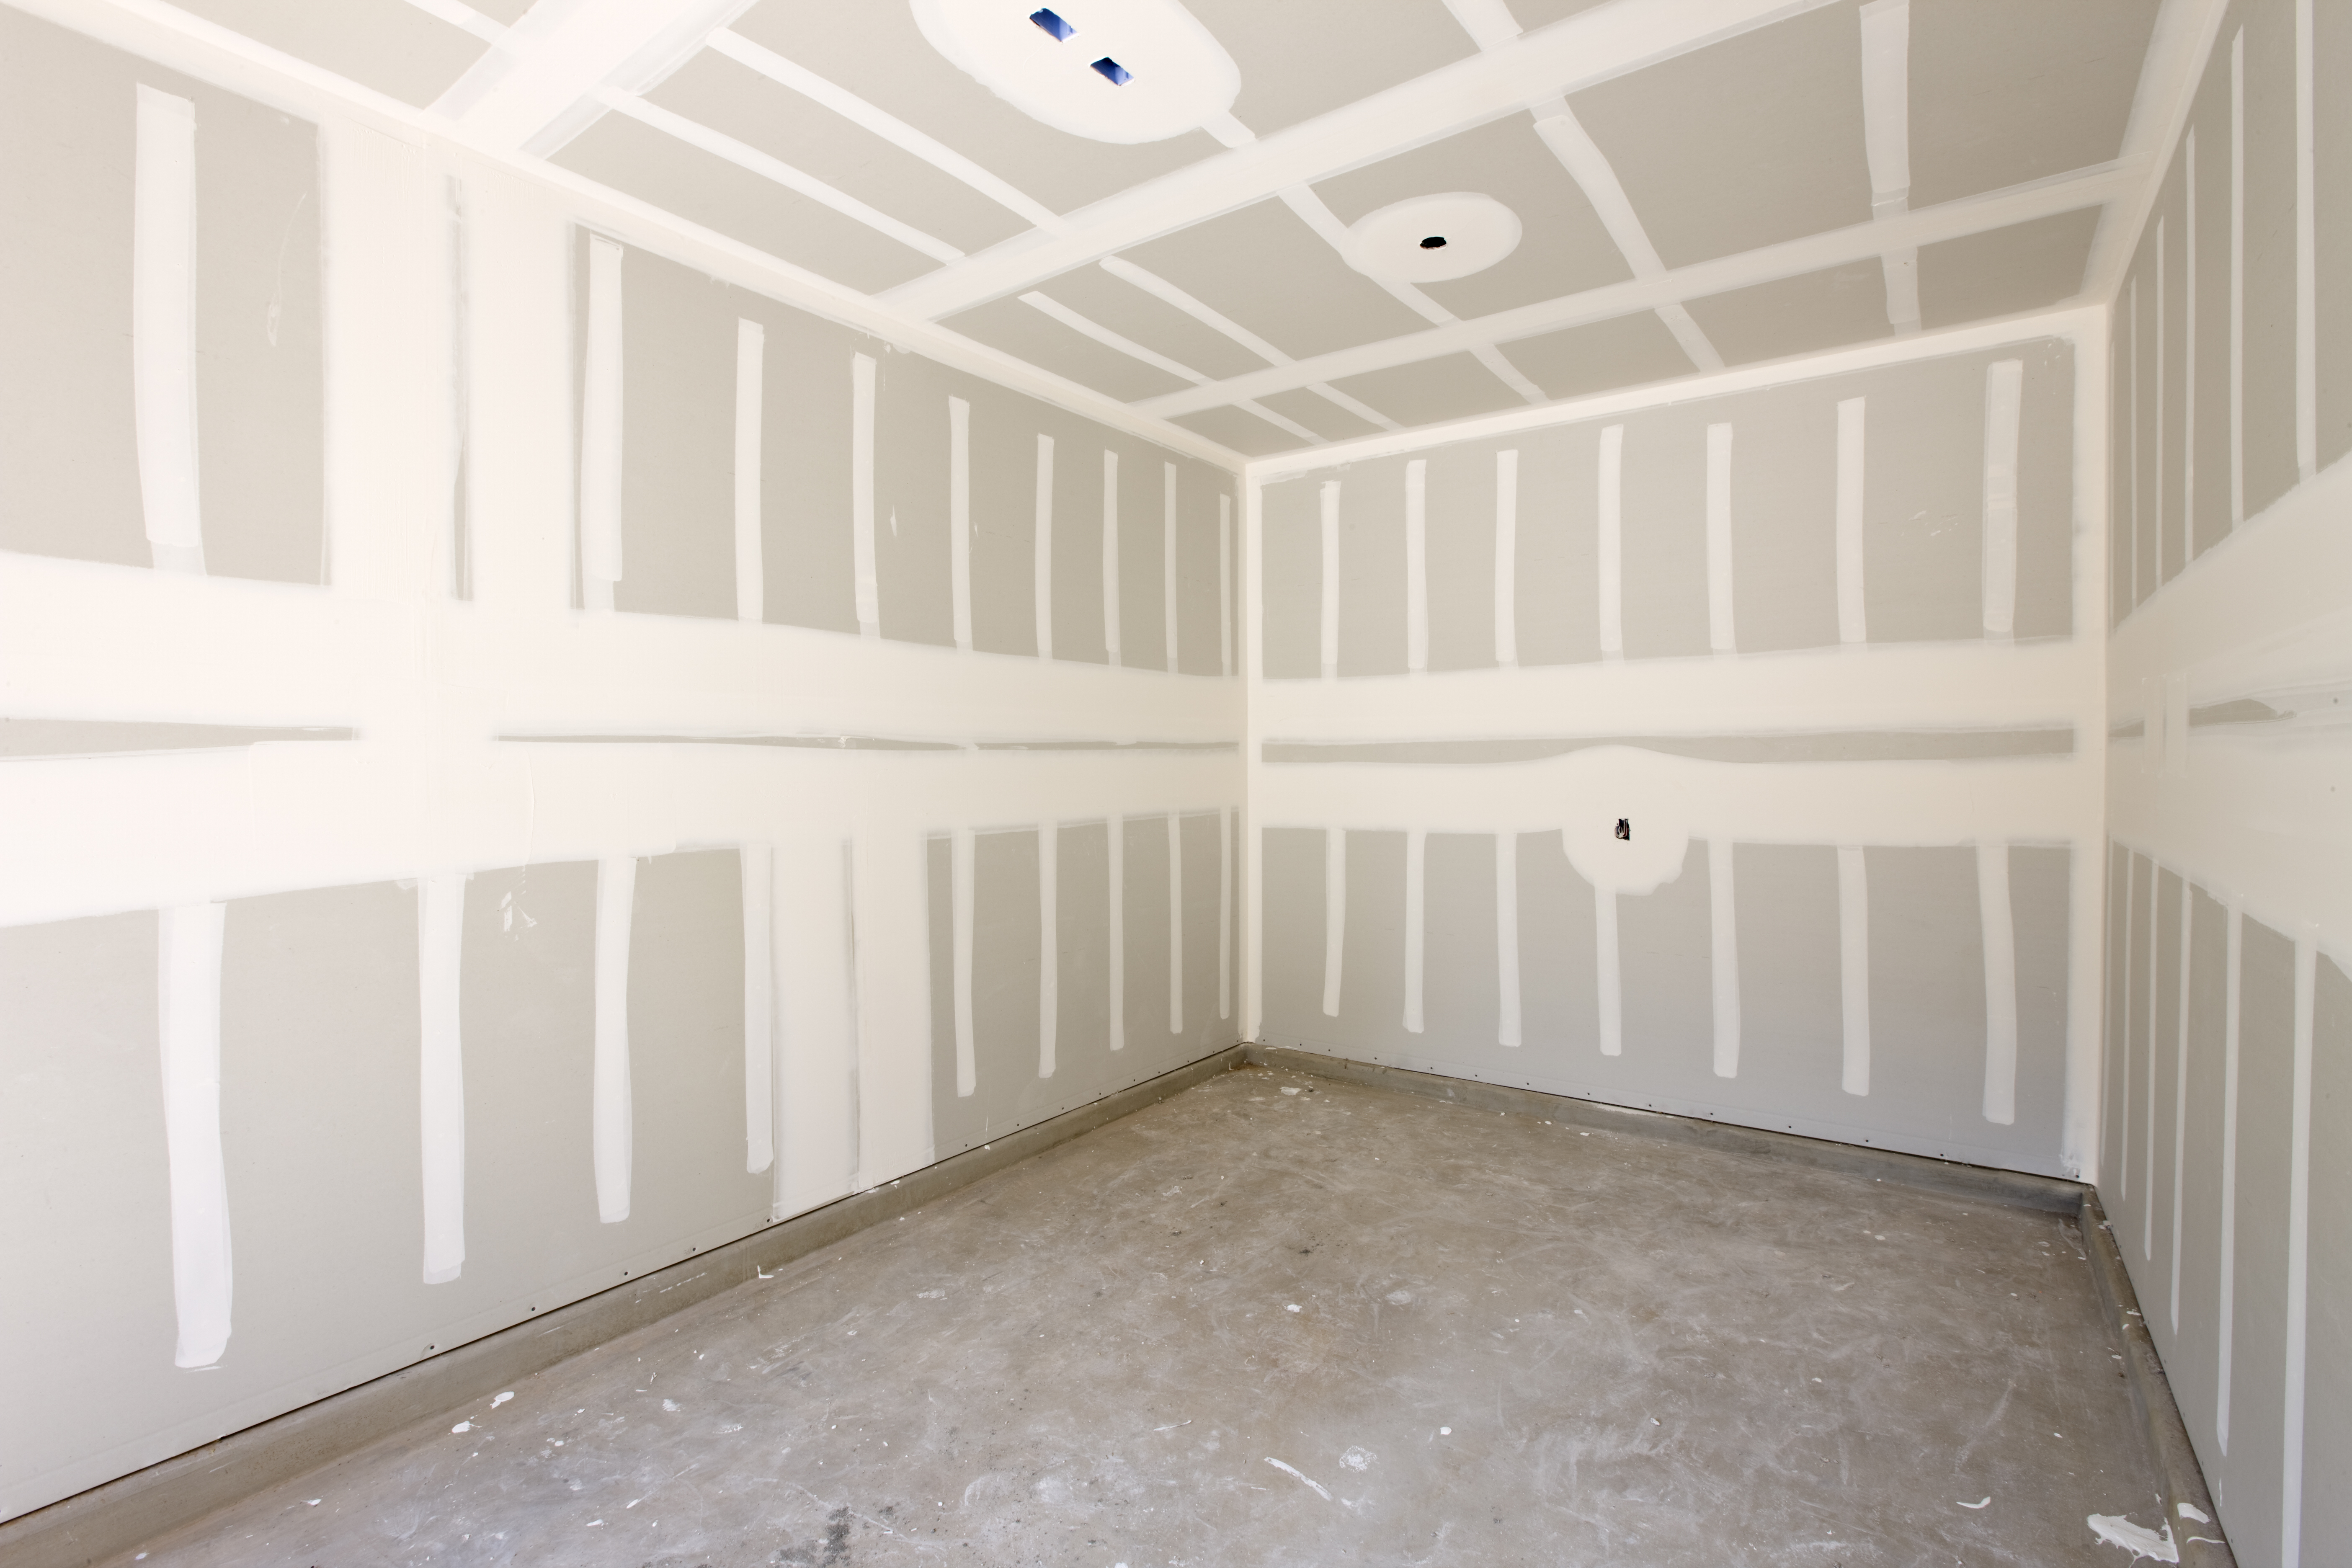 Drywall Projects in Savannah GA at Affordable Prices with ACR Drywall 912-481-8353